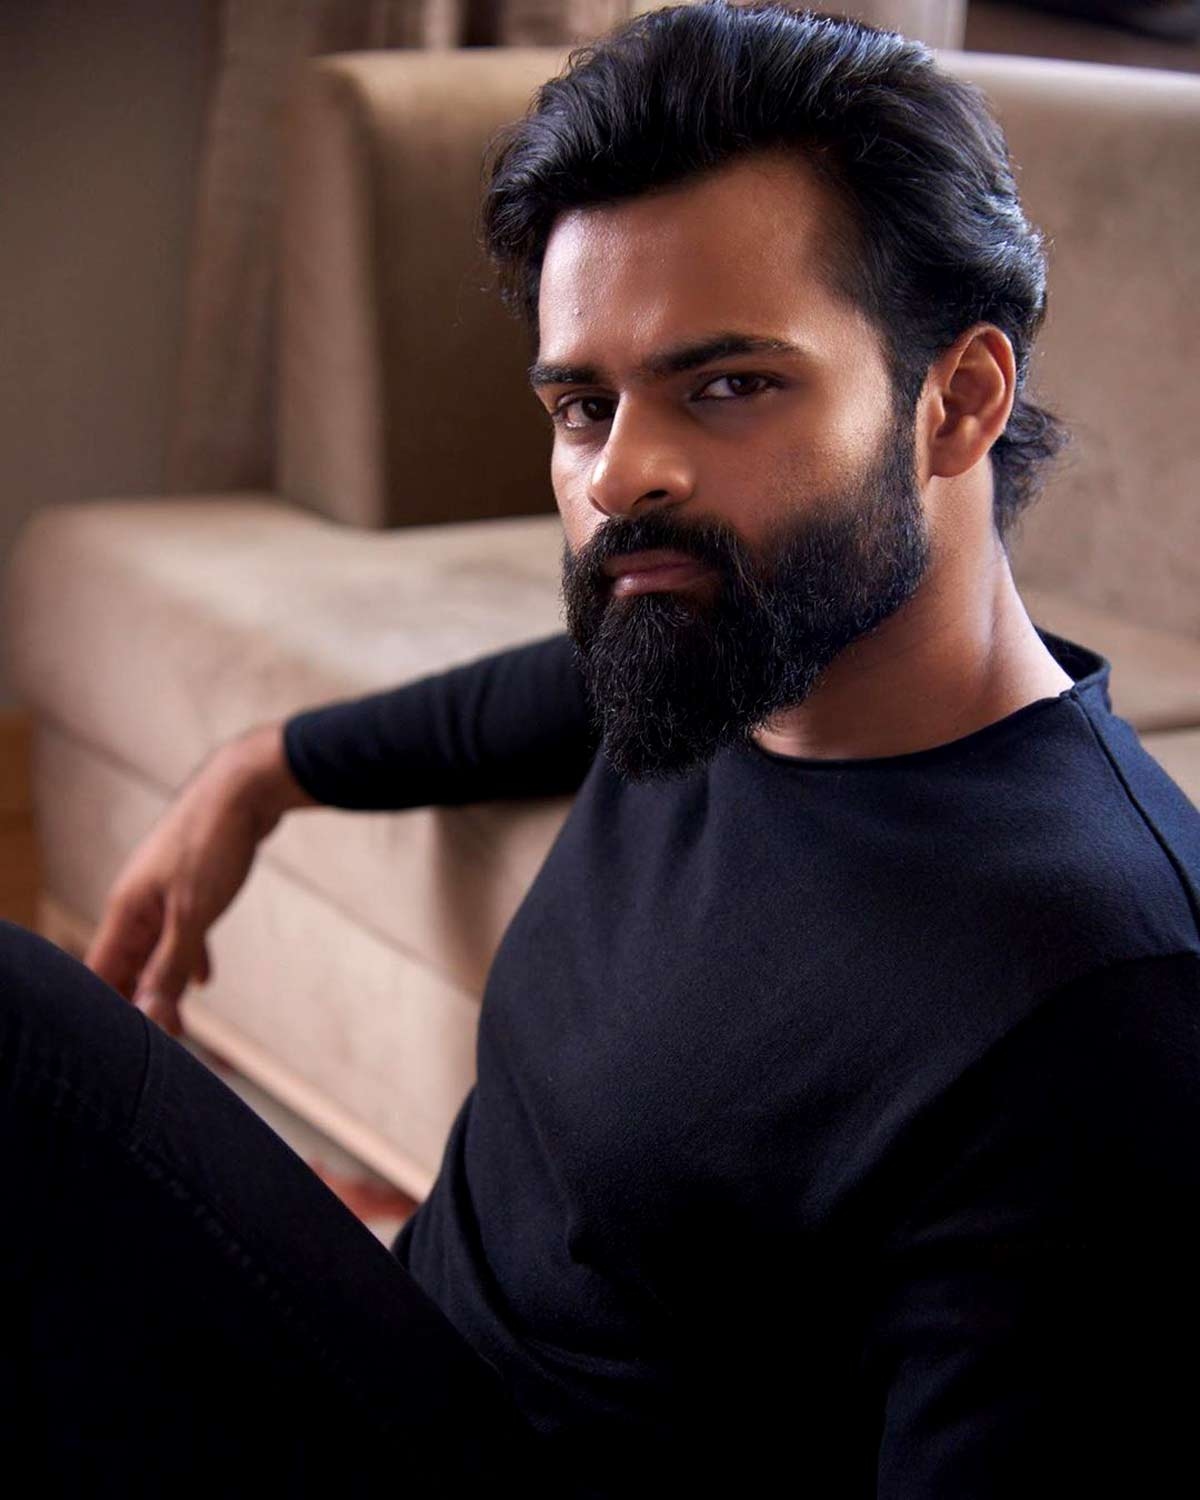 Pic Talk: Sai Dharam Tej sounds self-assured in his latest message